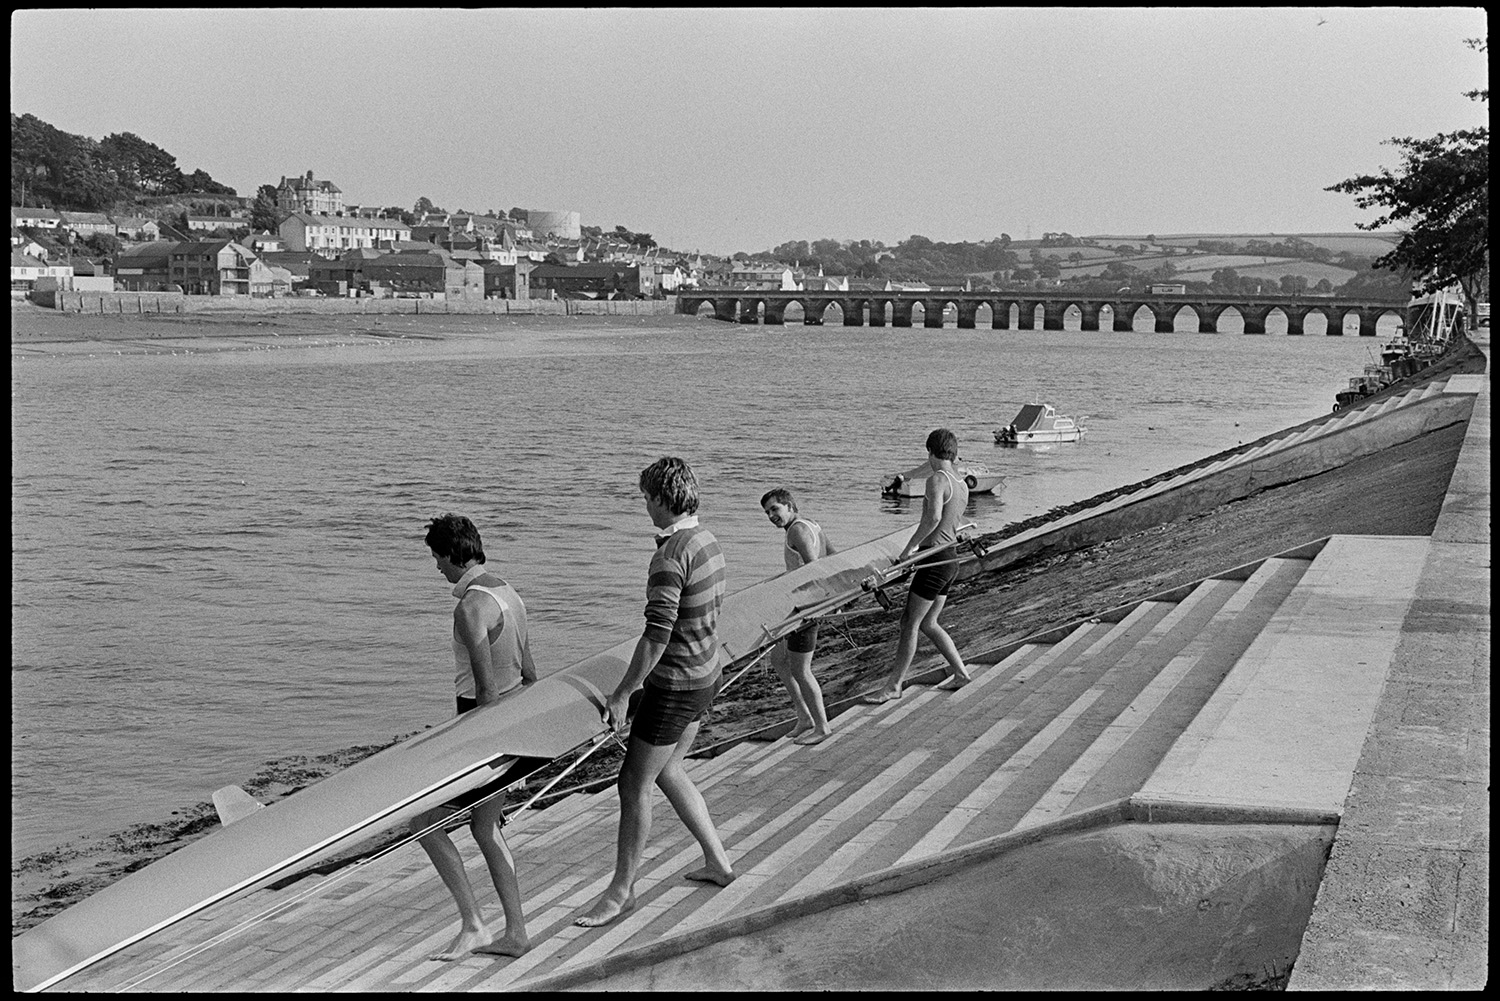 Oarsmen launching racing boat. 
[Four men carrying a racing boat down steps at Bideford Quay leading to the River Torridge. They are launching the boat to take part in a race. Bideford Long Bridge, also known as Bideford Old Bridge, can be seen in the background.]